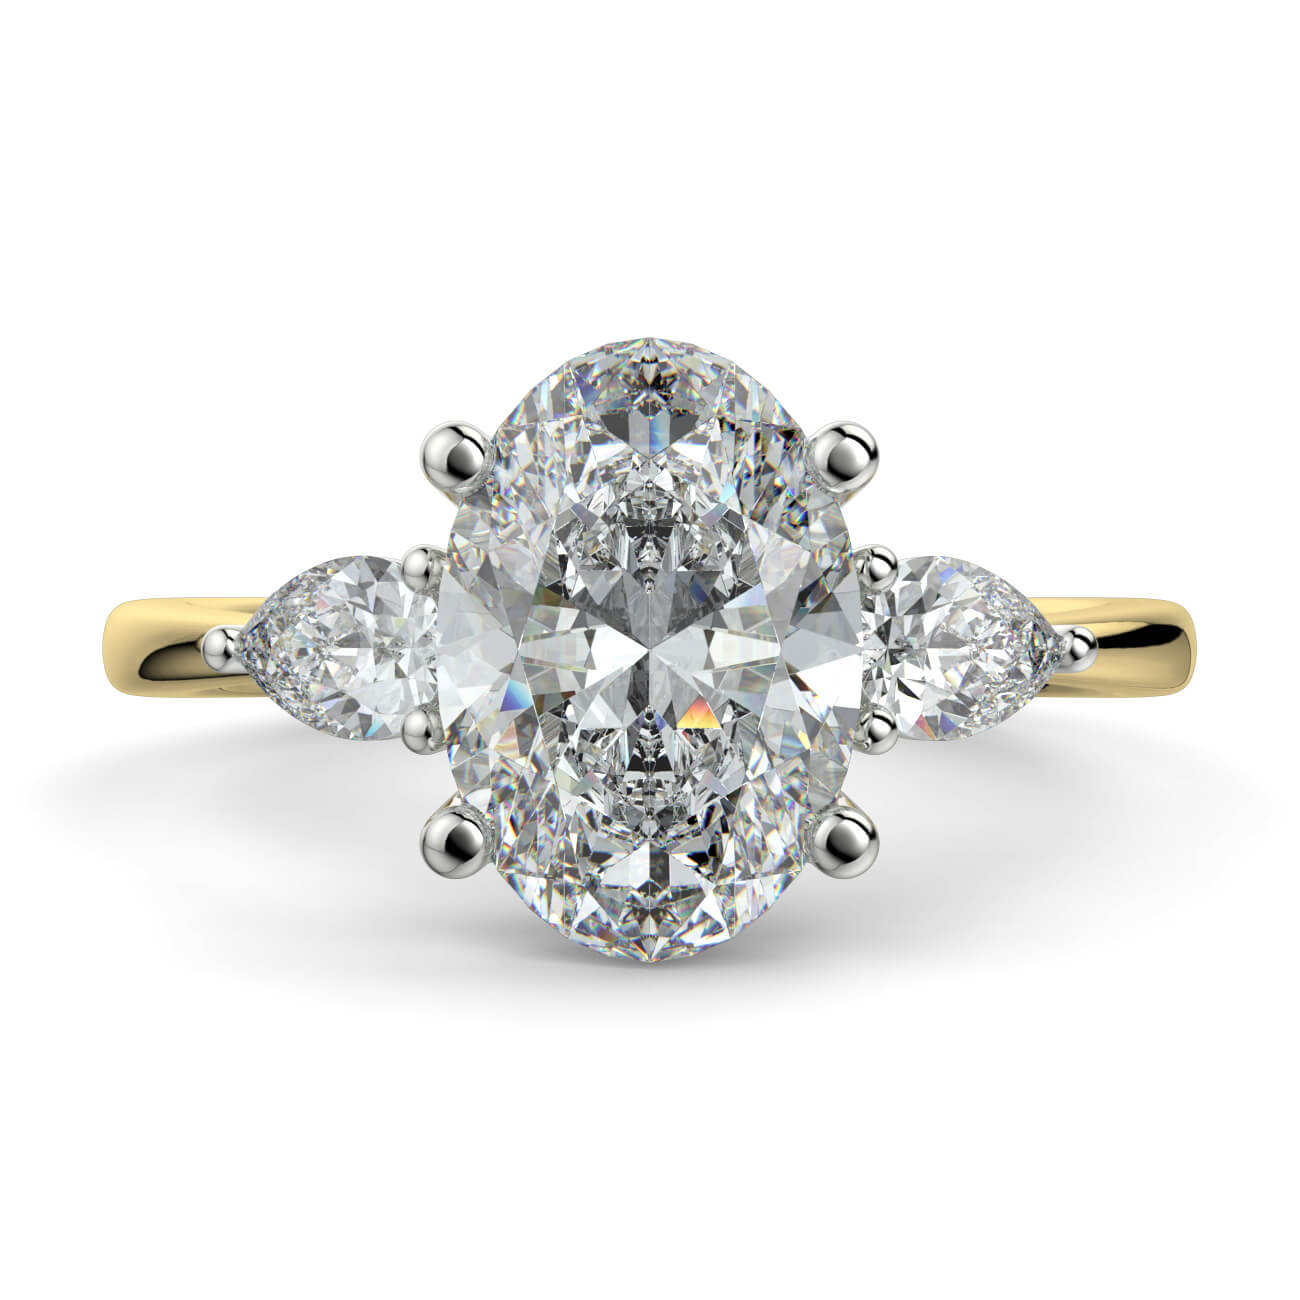 Oval Shape Diamond Ring With Pear Shape Side Diamonds In 18k Yellow and White Gold – Australian Diamond Network